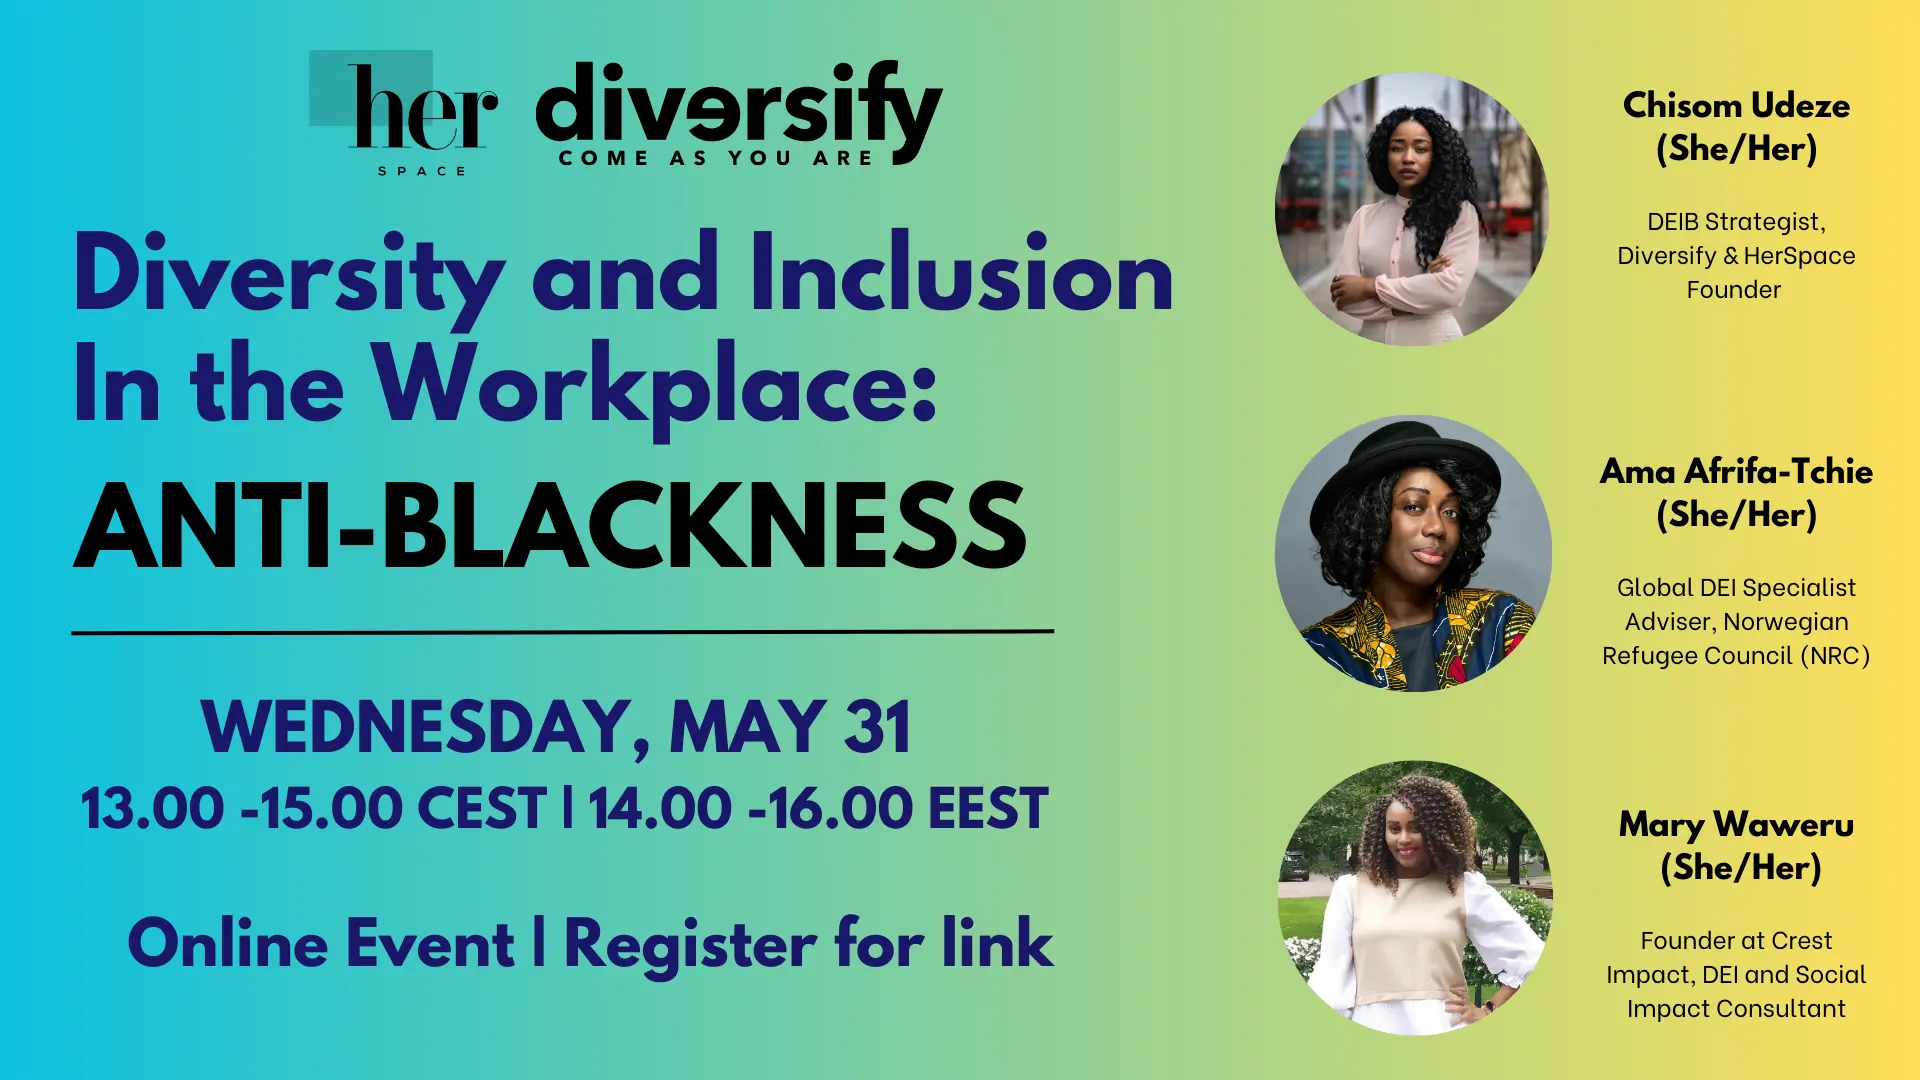 WebsiteBanner- Diversity and Inclusion in the Workplace: Anti-Blackness